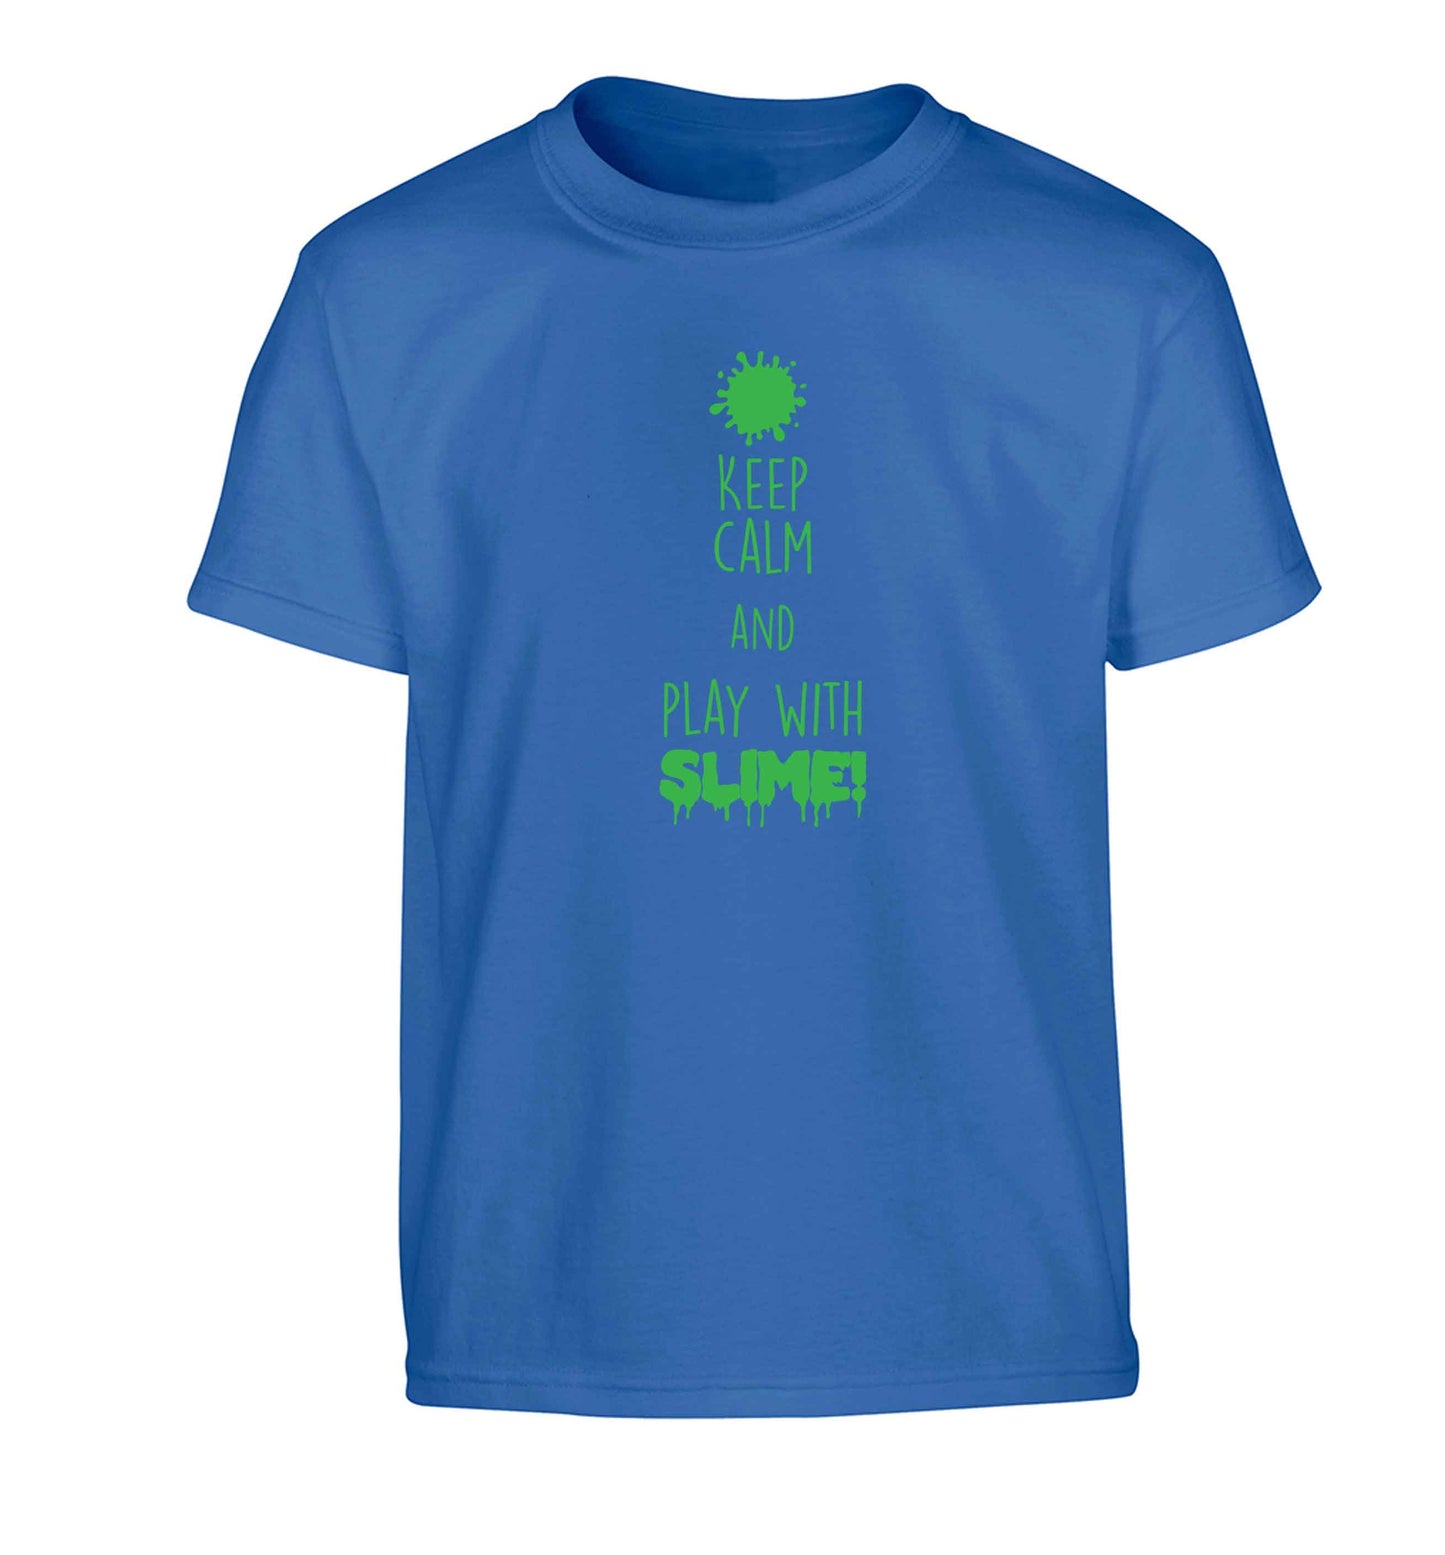 Neon green keep calm and play with slime!Children's blue Tshirt 12-13 Years